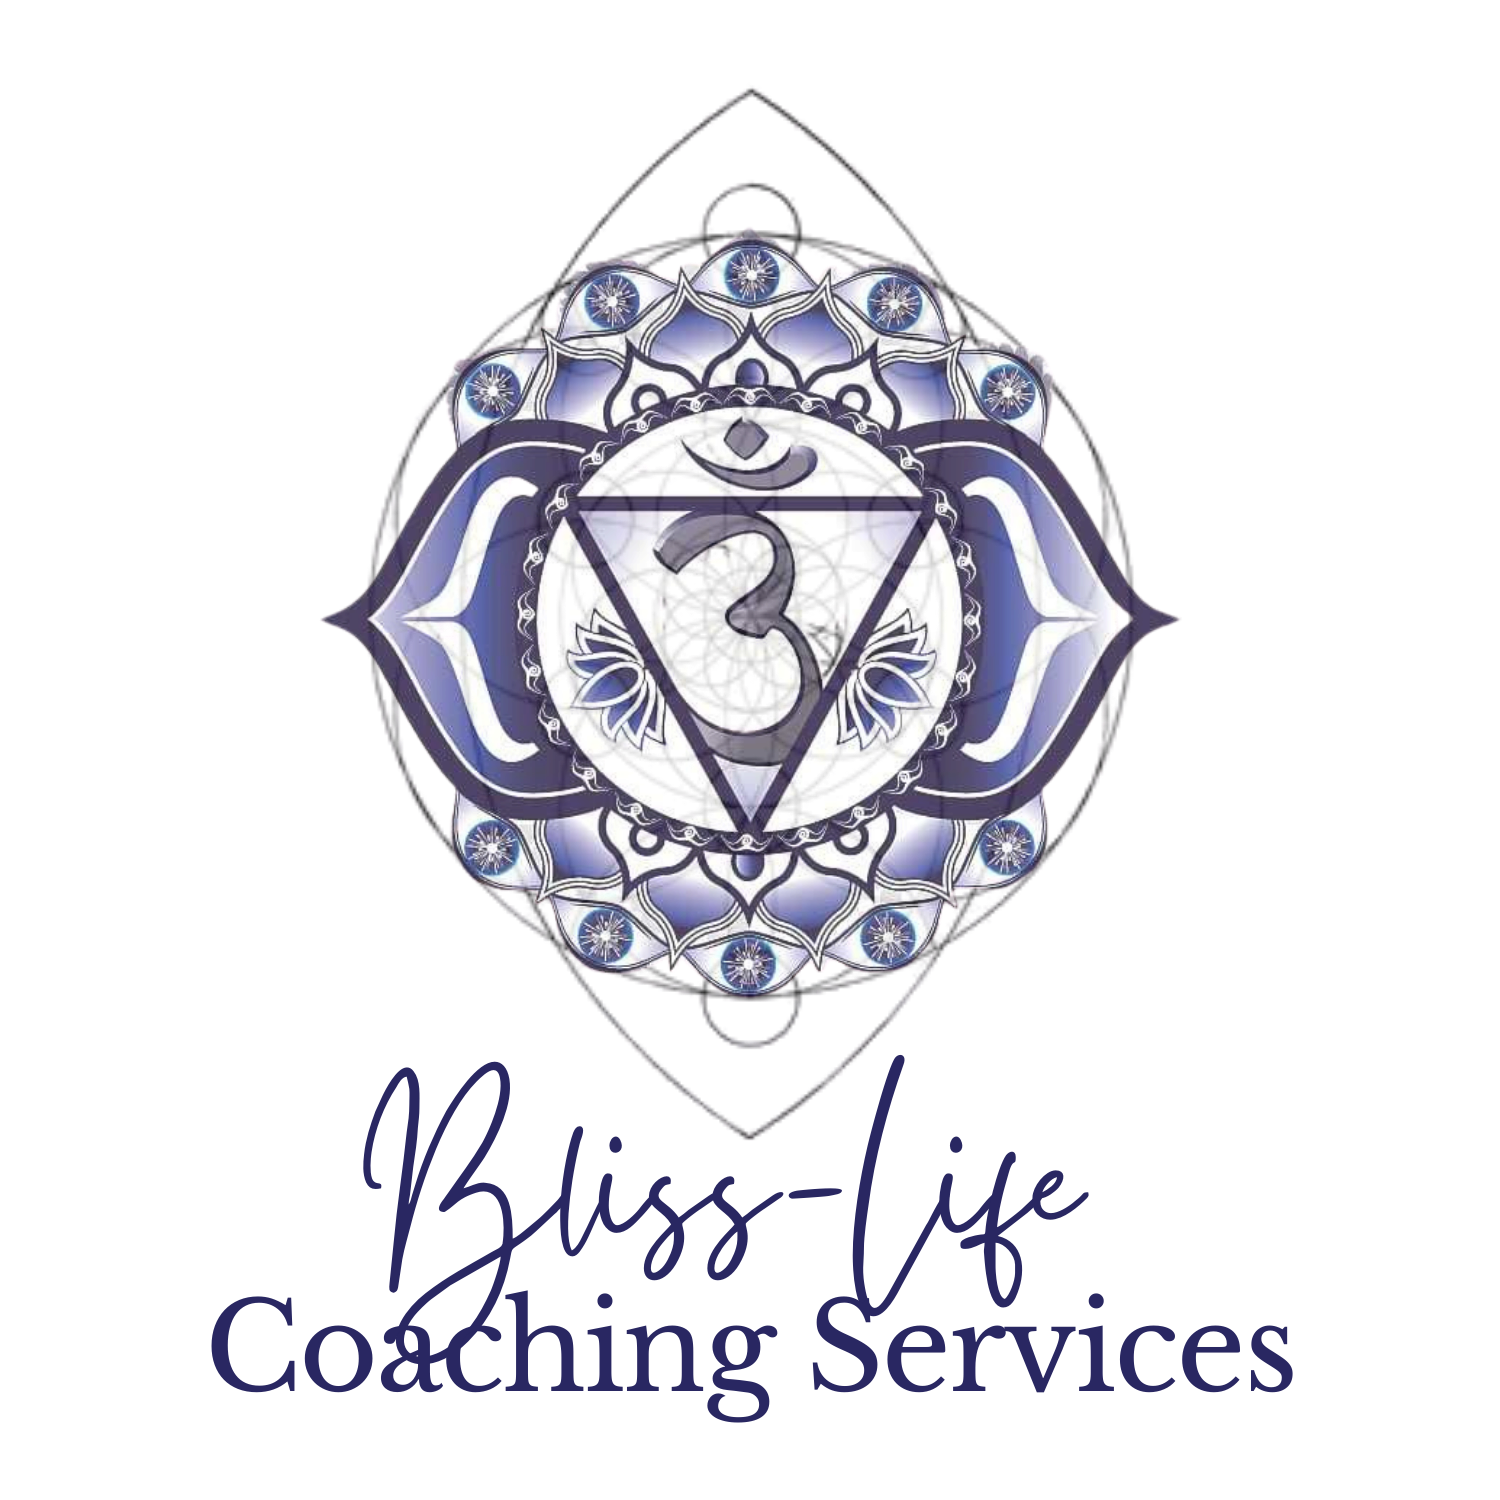 Bliss-Life Coaching Services logo